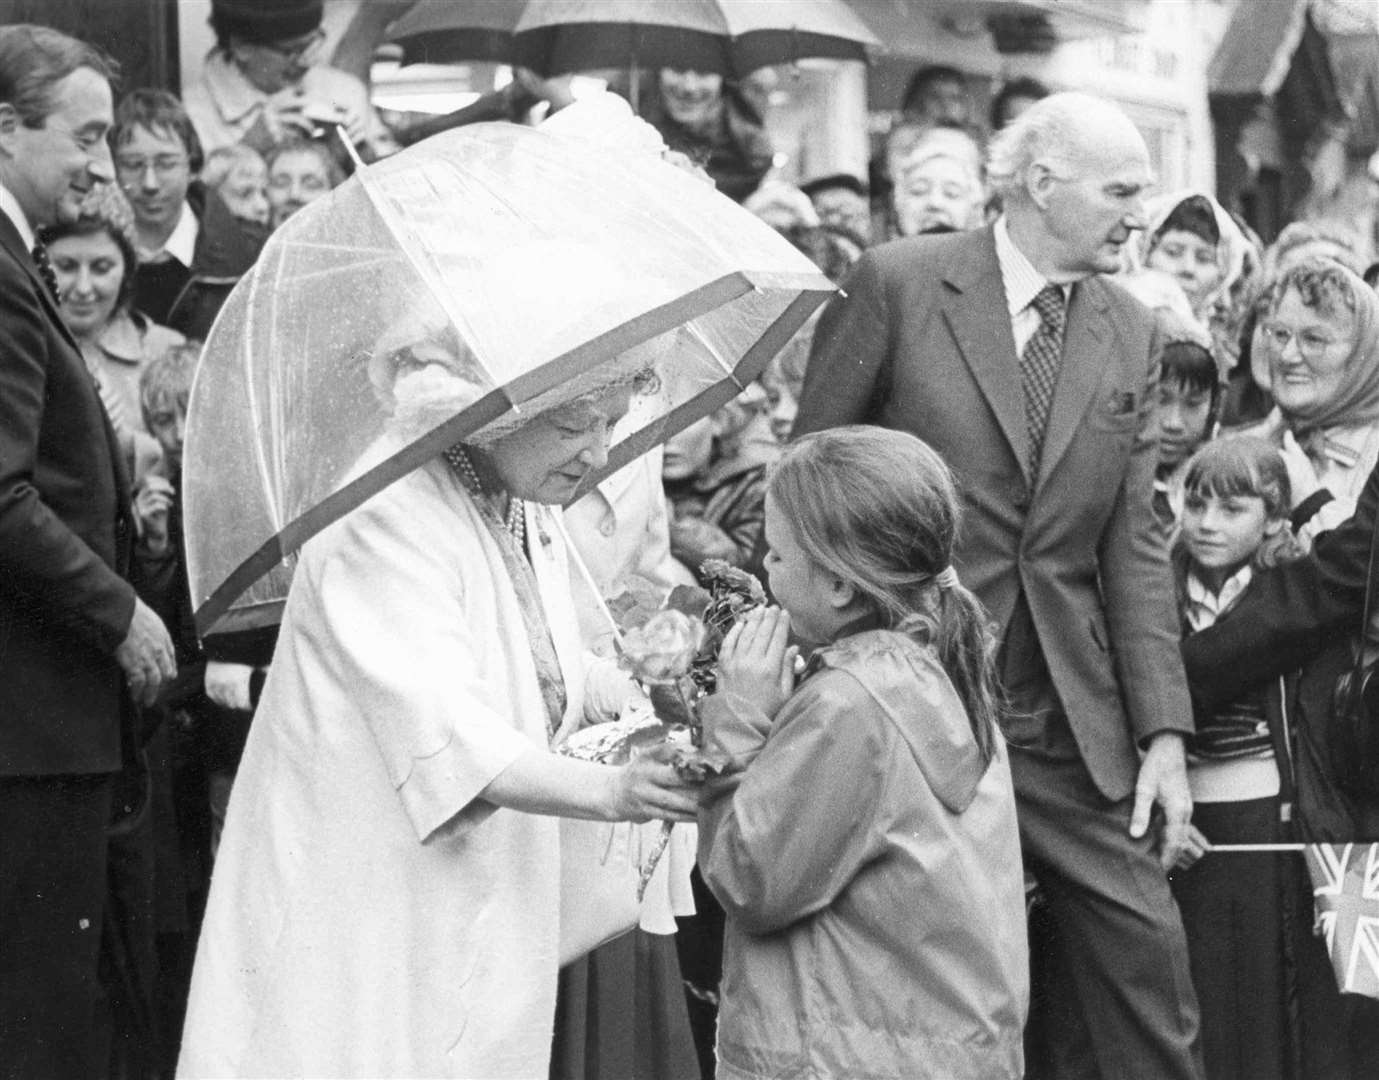 When the Queen Mother dropped into New Romney in July 1980, yhe excitement was too much for brownie Juliette Payne, nine, who stepped out of the crowd to offer a pink rose to the royal visitor, then just burst into tears. But the Queen Mother came to the rescue by reaching out sympathetically to wipe away the tears and asking kindly: ''Did you pick it in your own garden?"